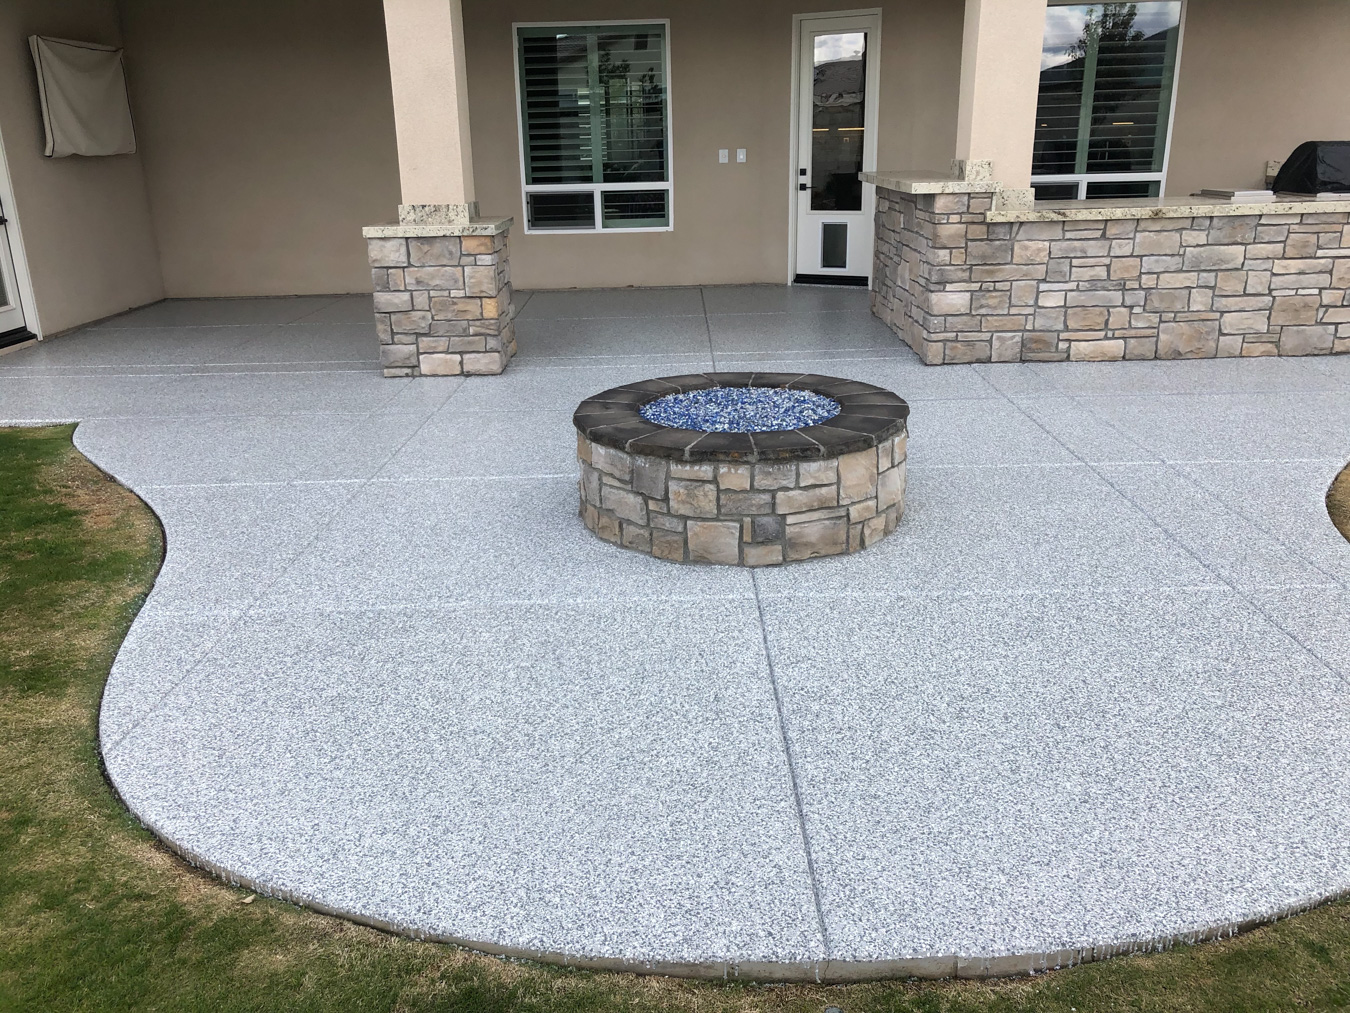 Concrete Flooring on a Patio and around fire pit